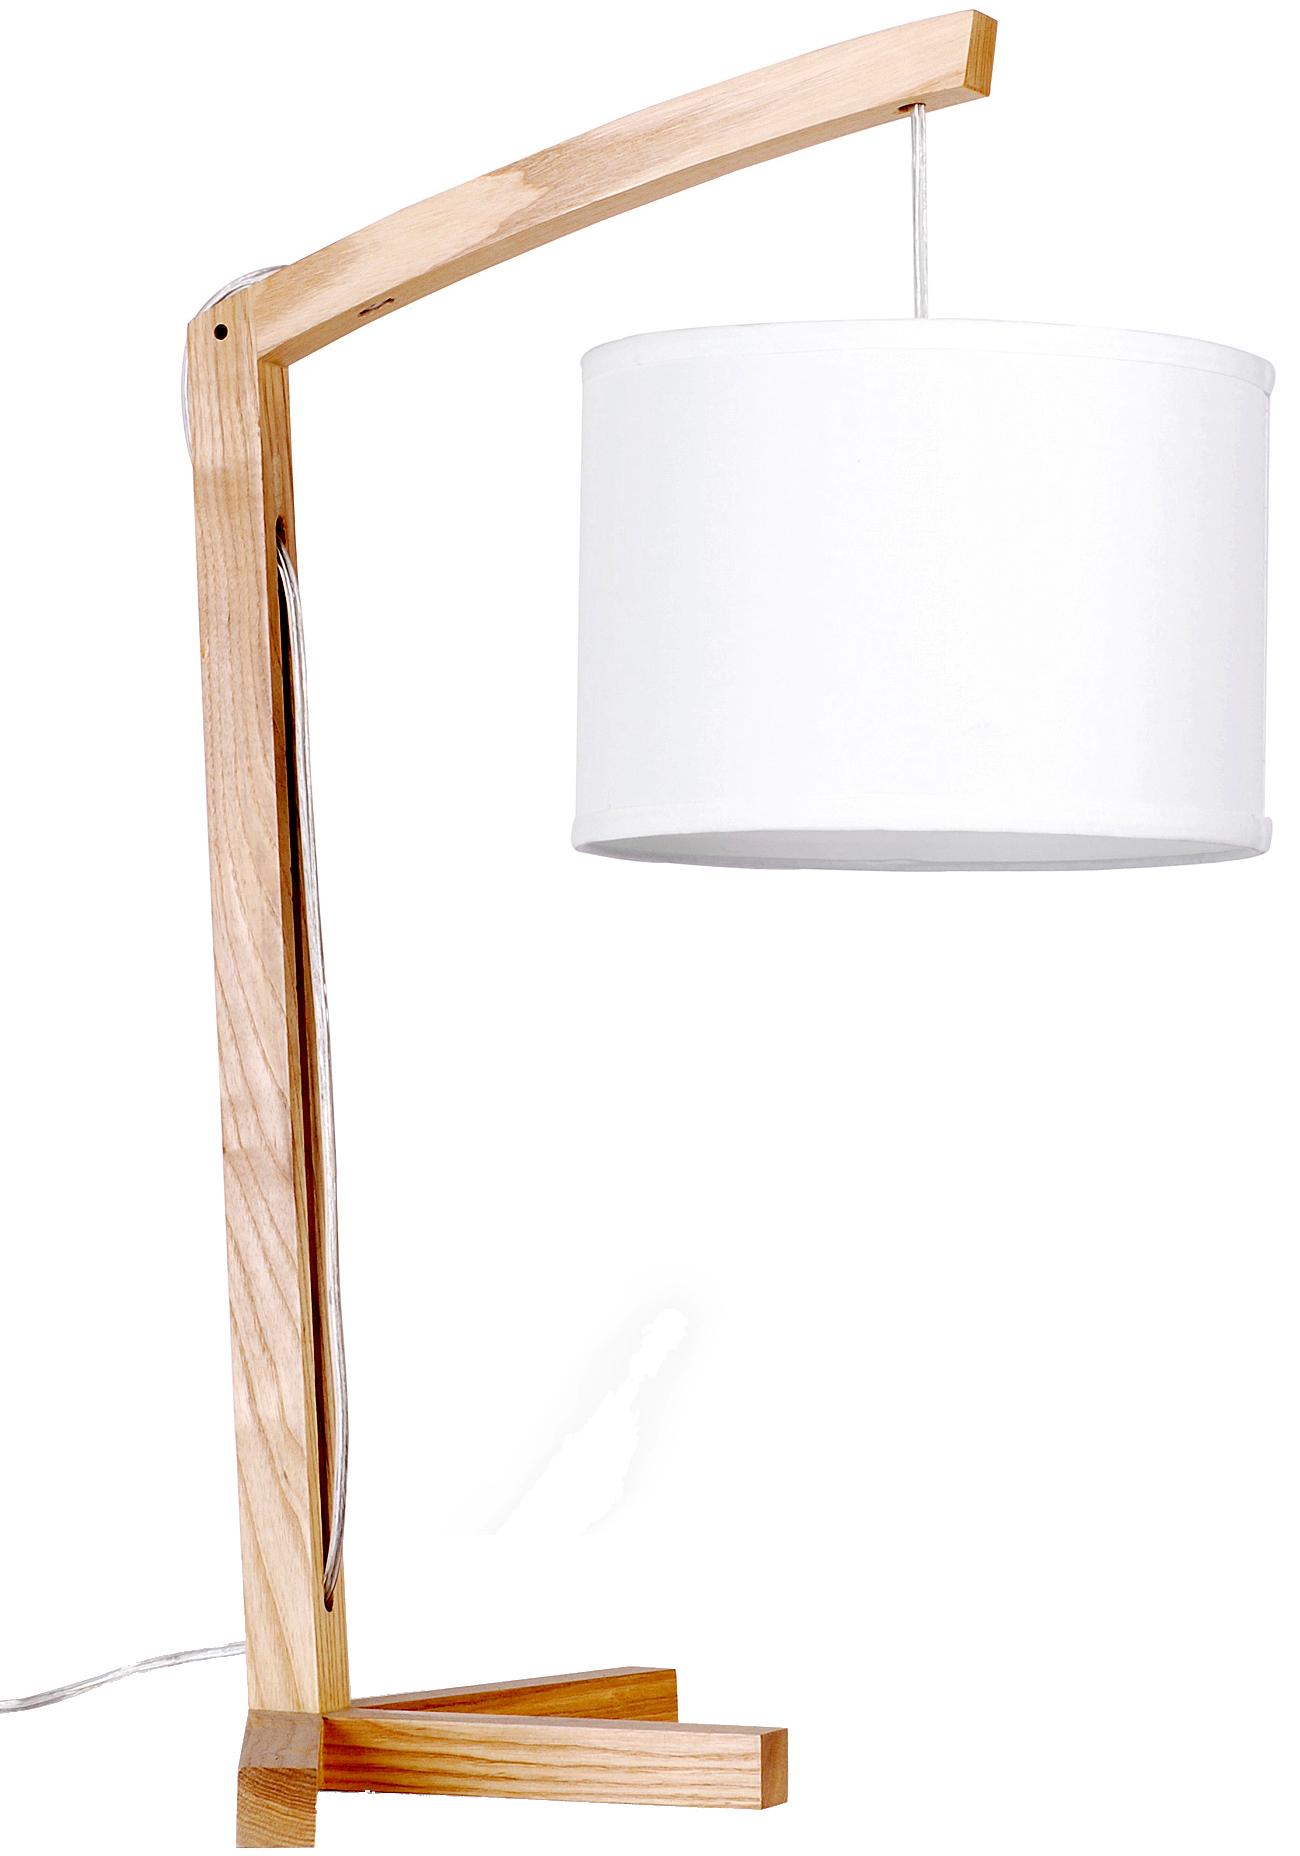 Gorgeous modern wooden table lamp